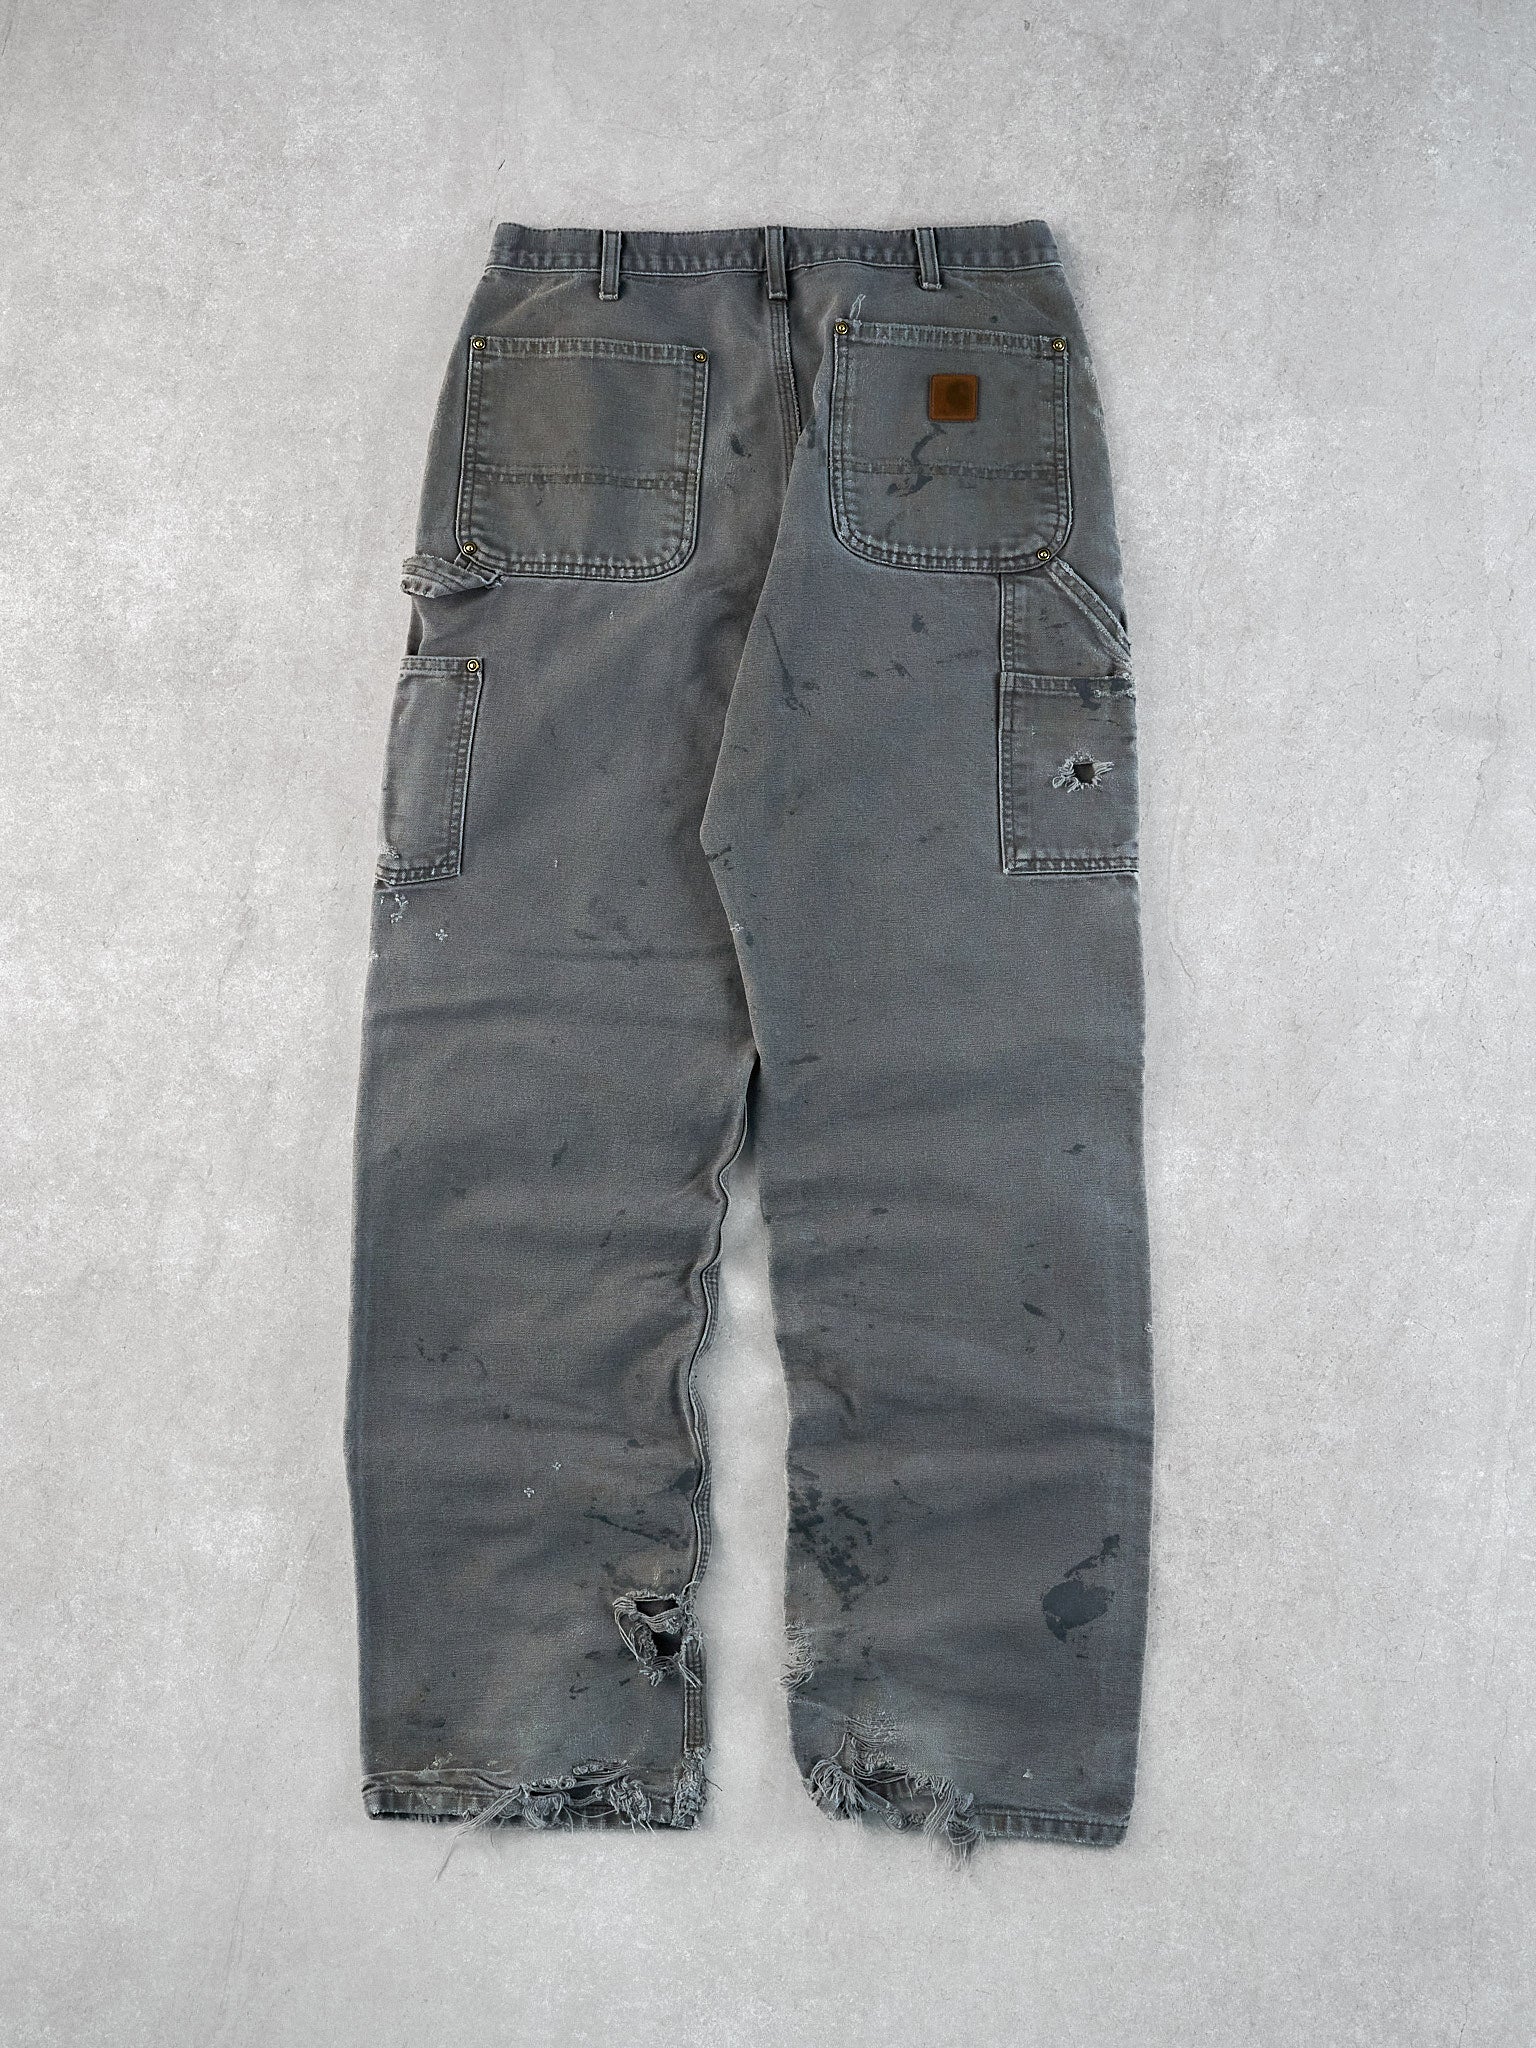 Vintage 90s Grey Faded Carhartt Distressed Double Knee Carpenter Pants (34x34)